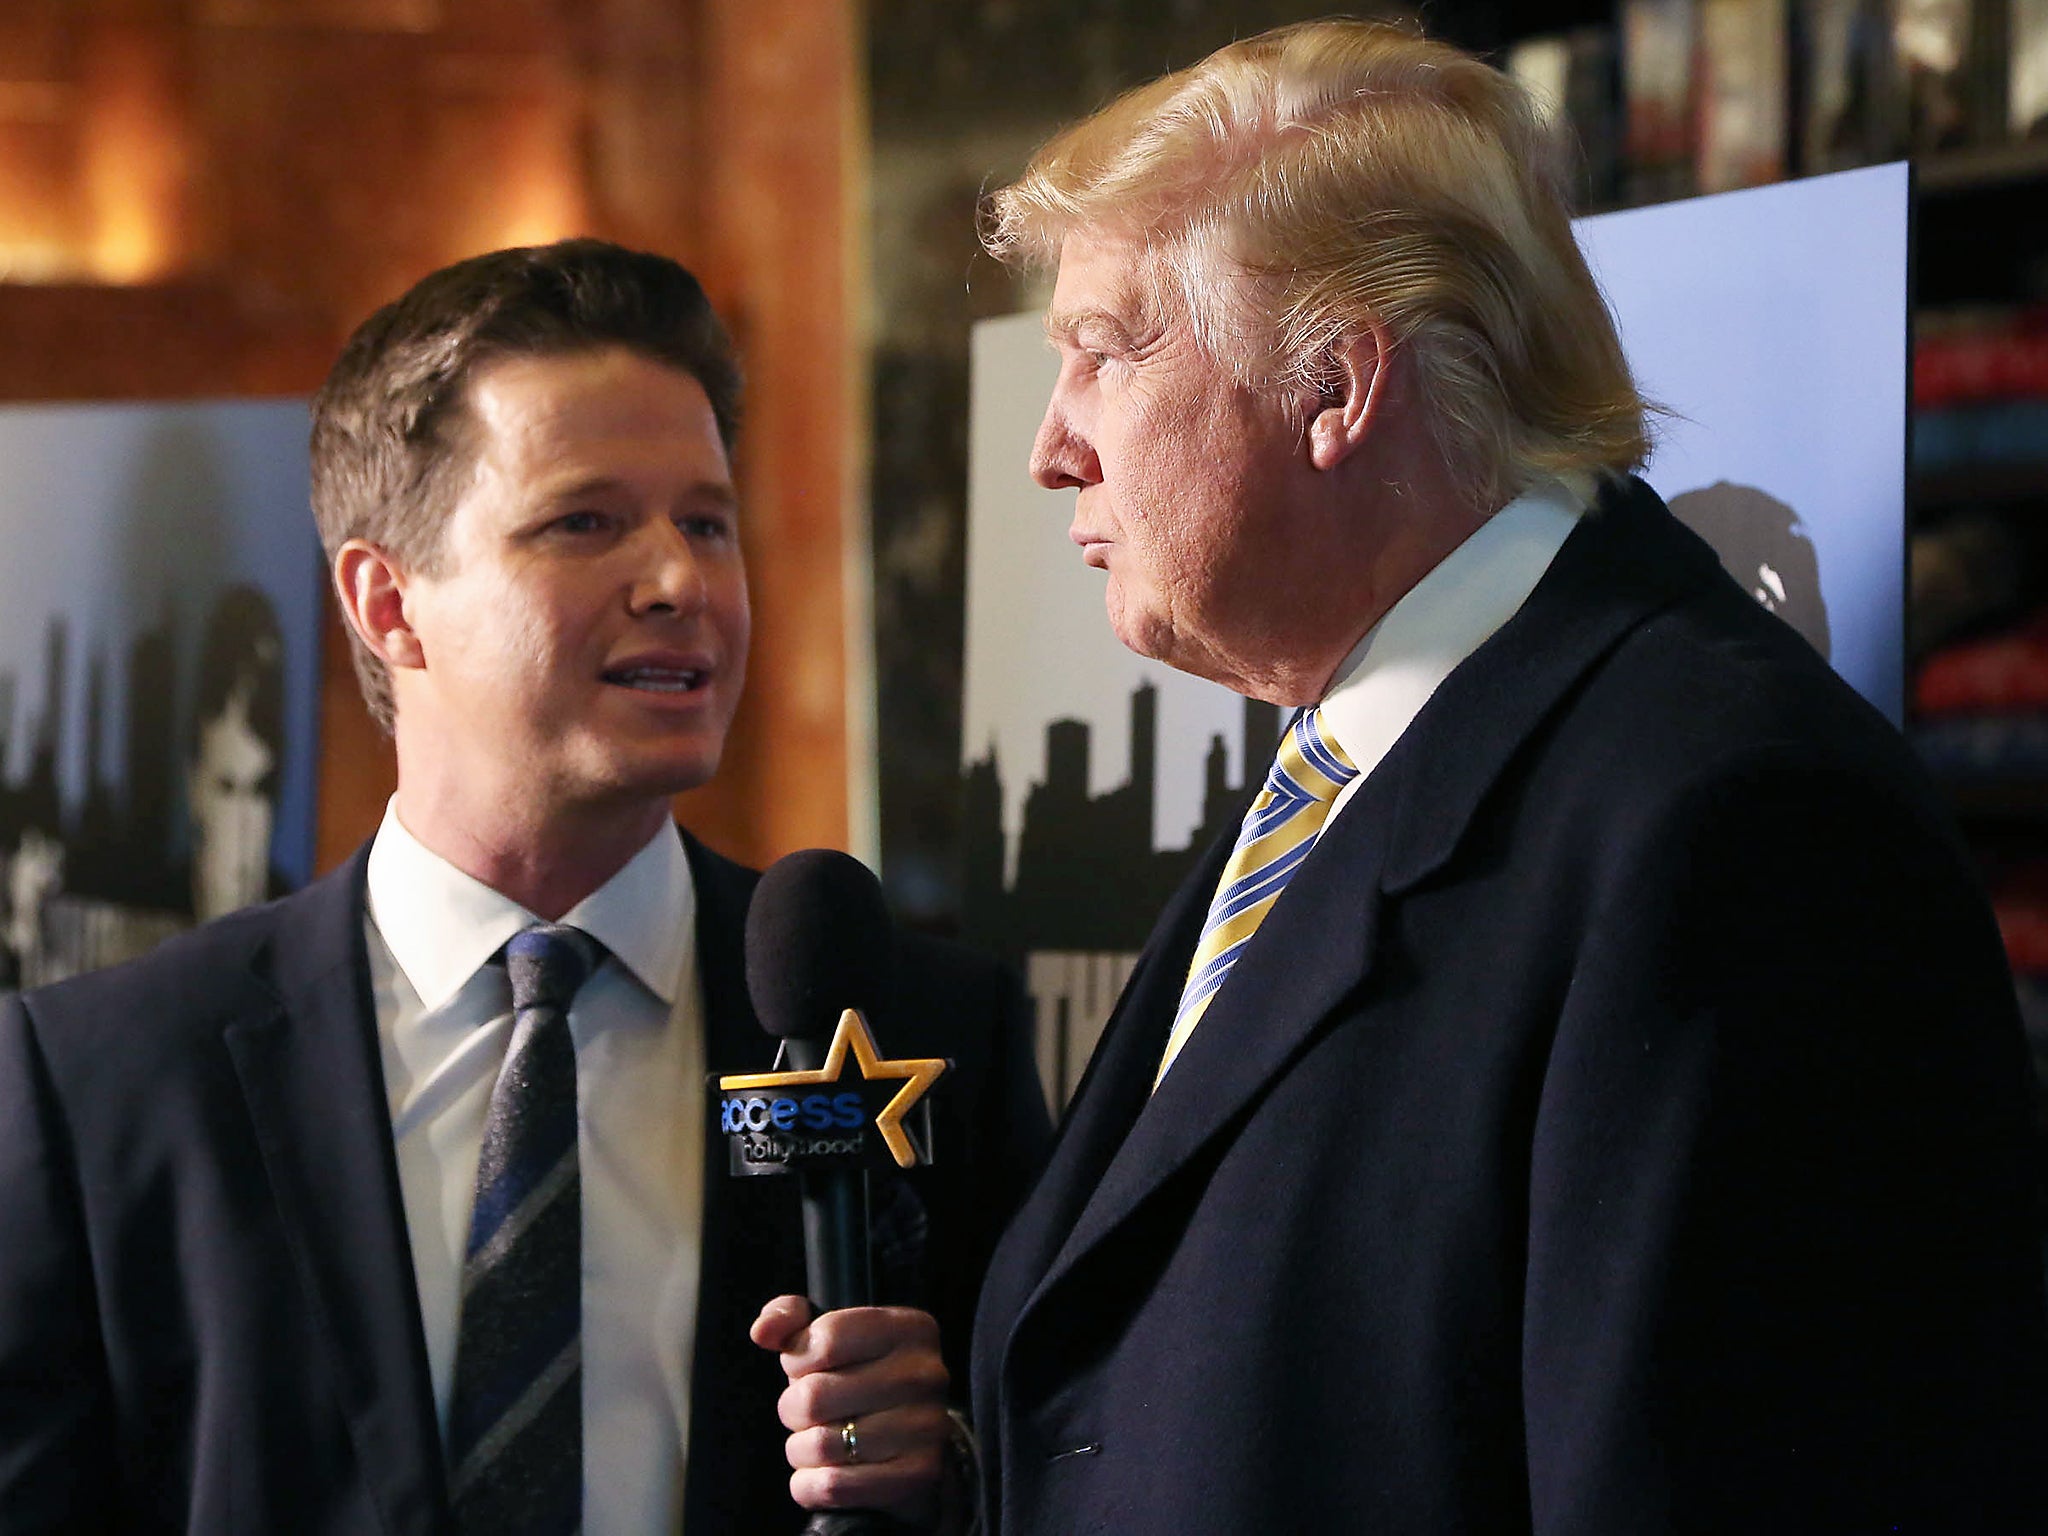 TV host Billy Bush lost his job over a crude conversation with Donald Trump, who did not suffer a similar hitch